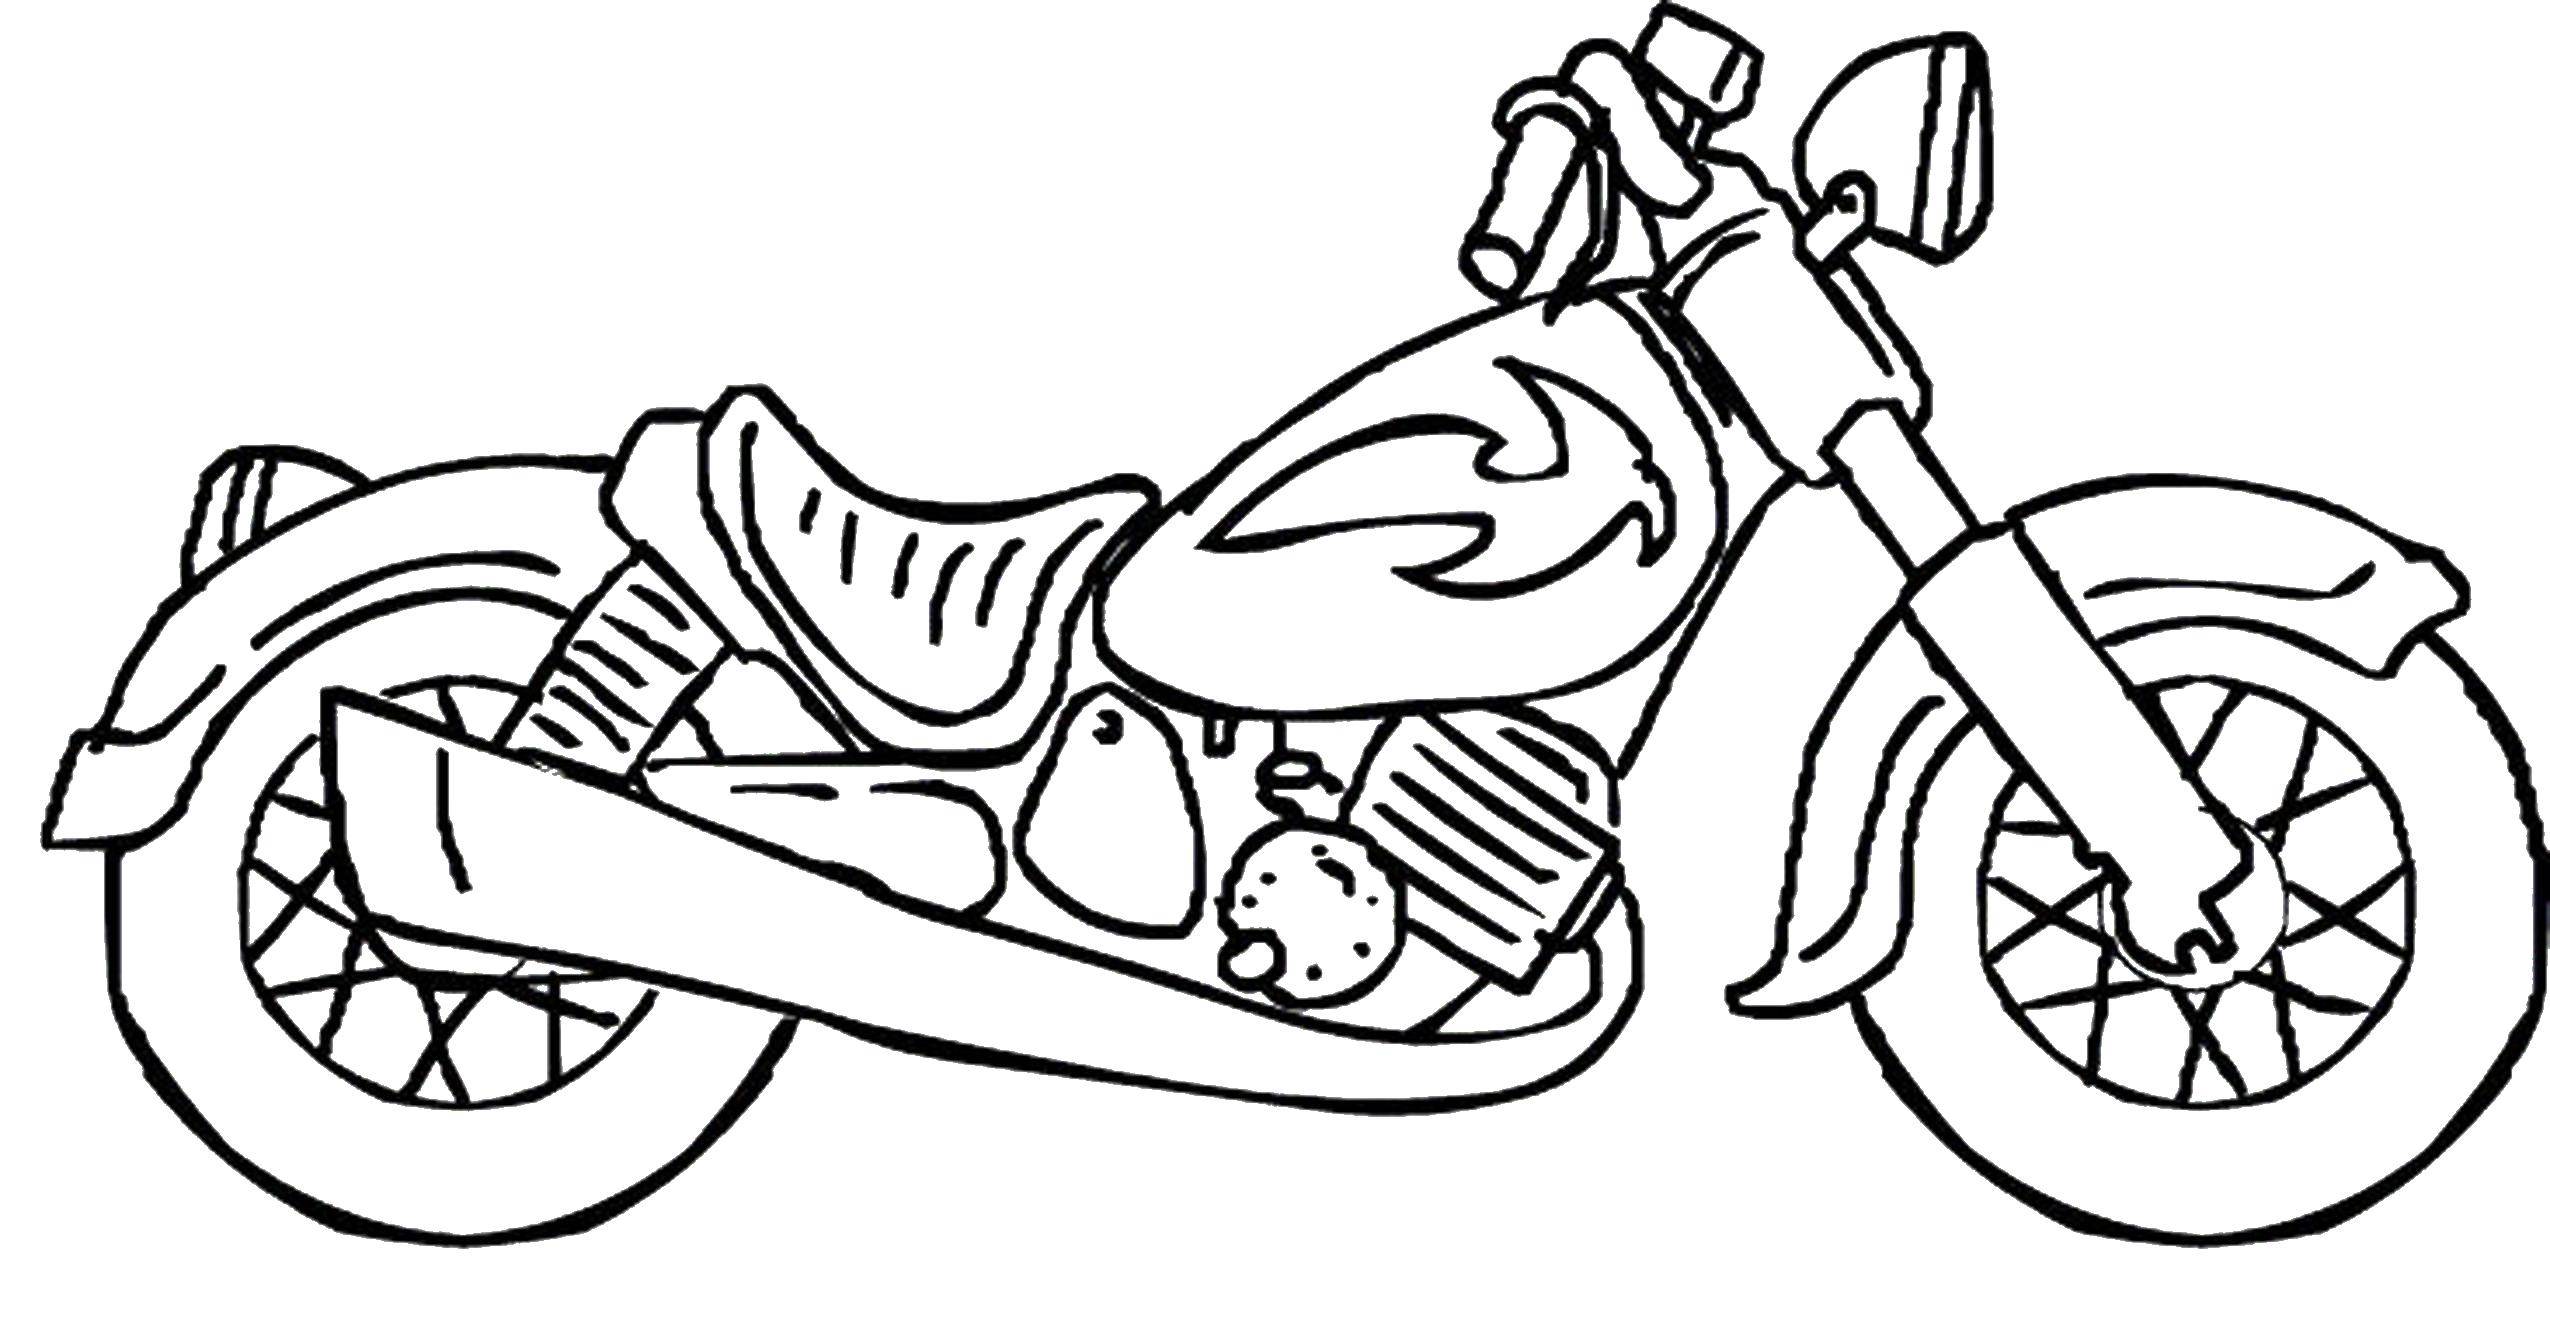 Coloring Motorbike. Category For boys . Tags:  motorcycle, motorbike.